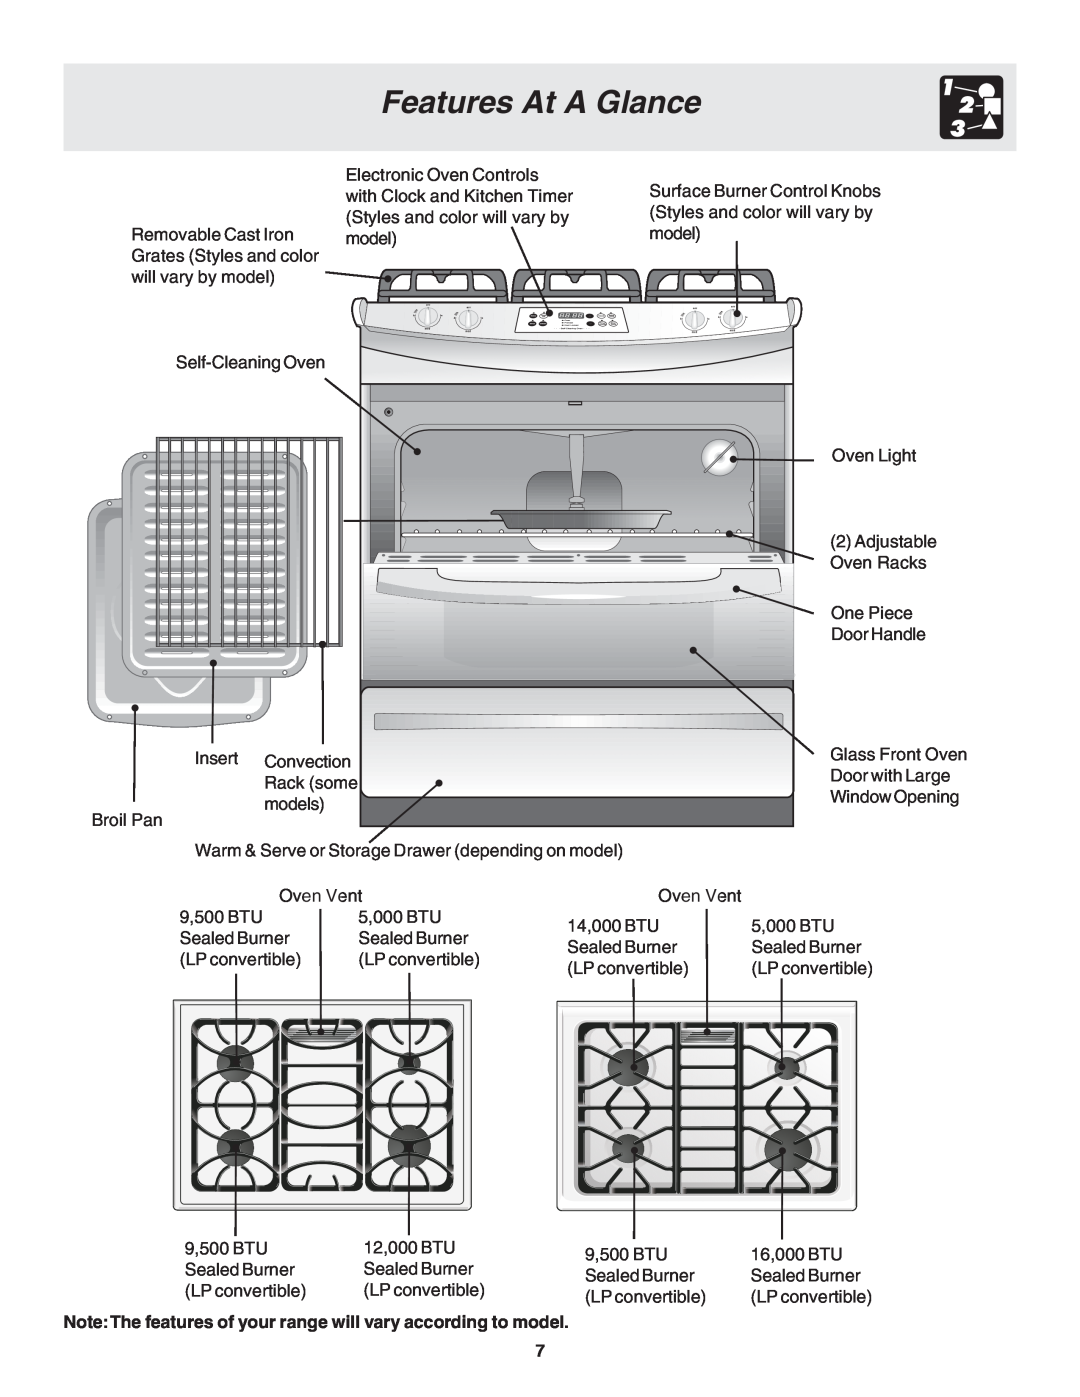 Frigidaire 318203858 warranty Features At A Glance, NoteThe features of your range will vary according to model 